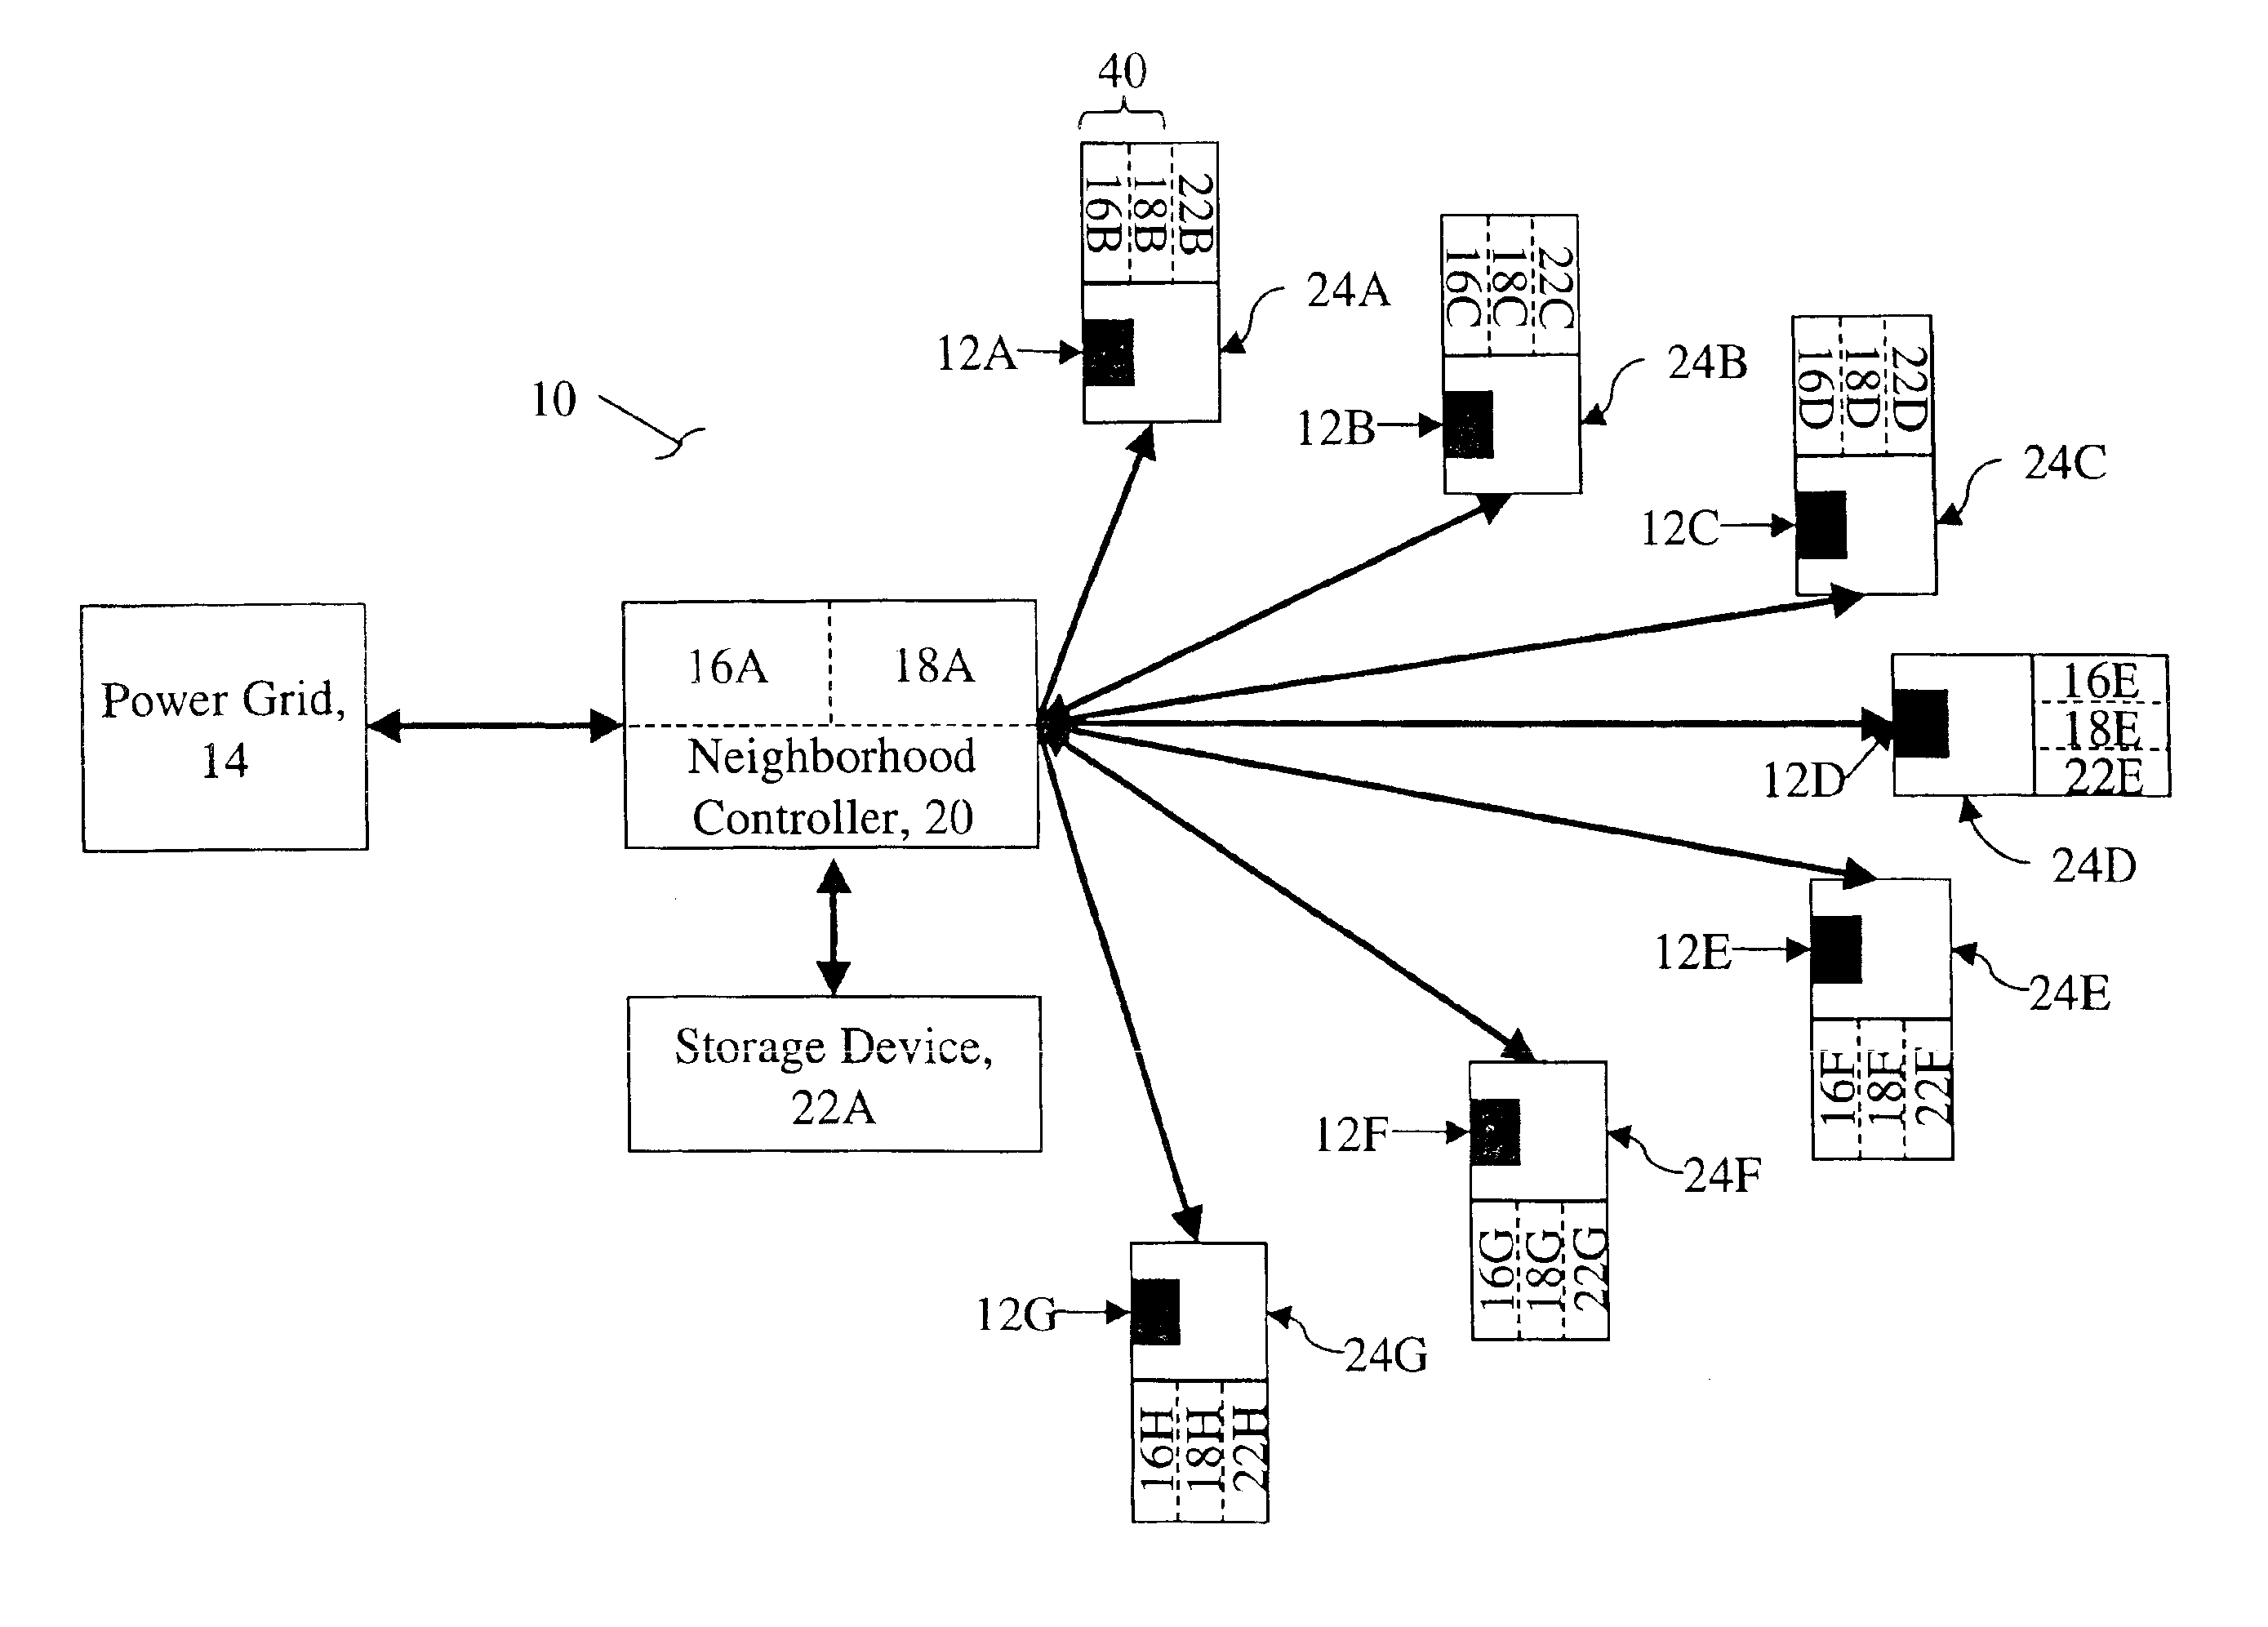 Distributed energy neural network integration system